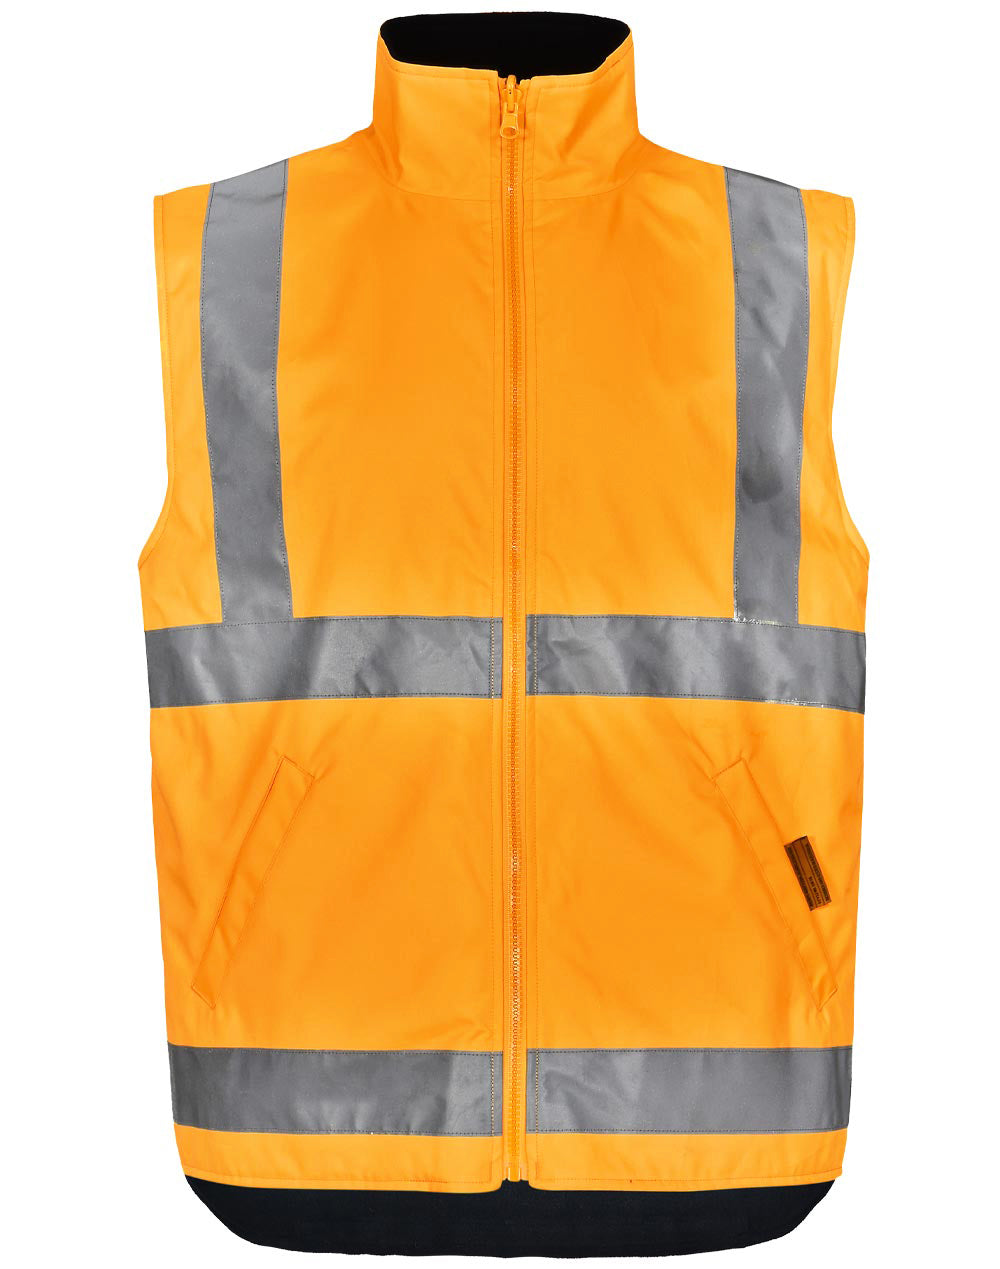 Vic Rail 4 In 1 Jacket - made by AIW